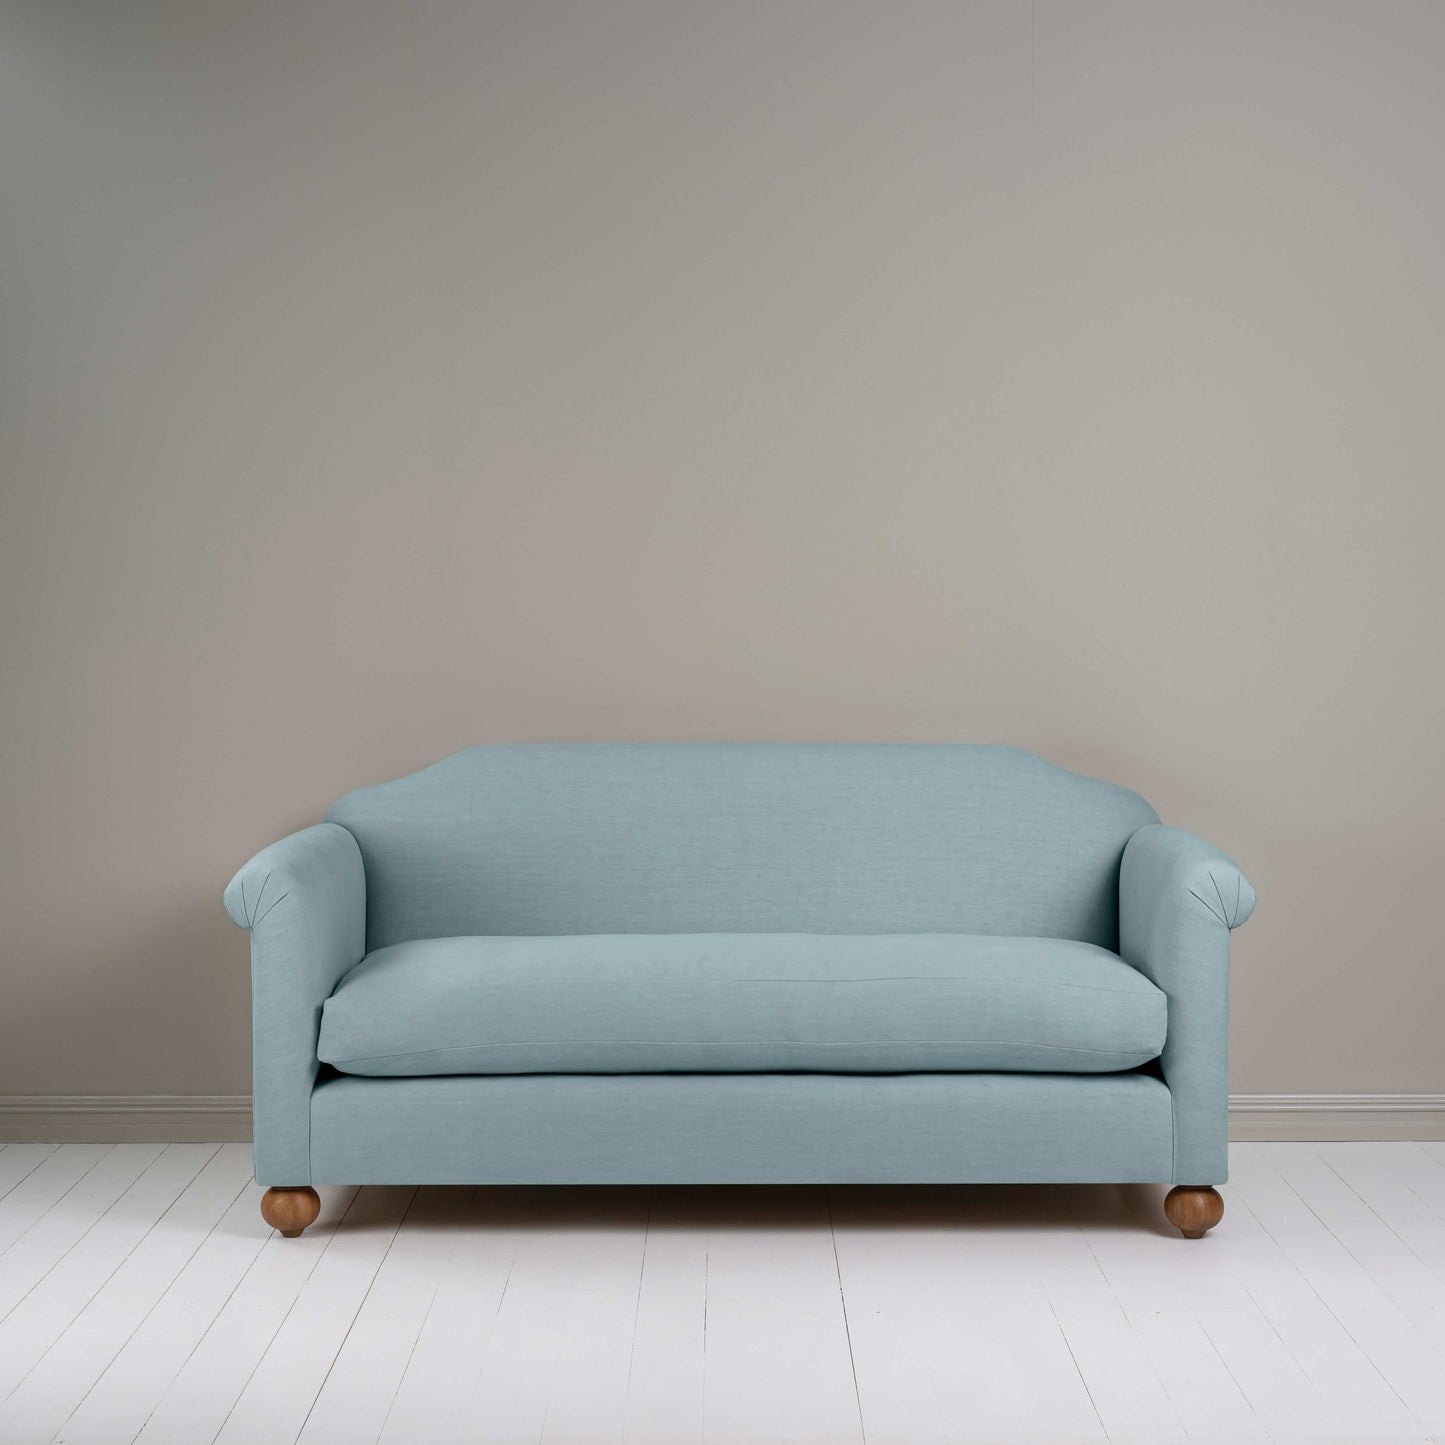 Dolittle 3 Seater Sofa in Laidback Linen Cerulean